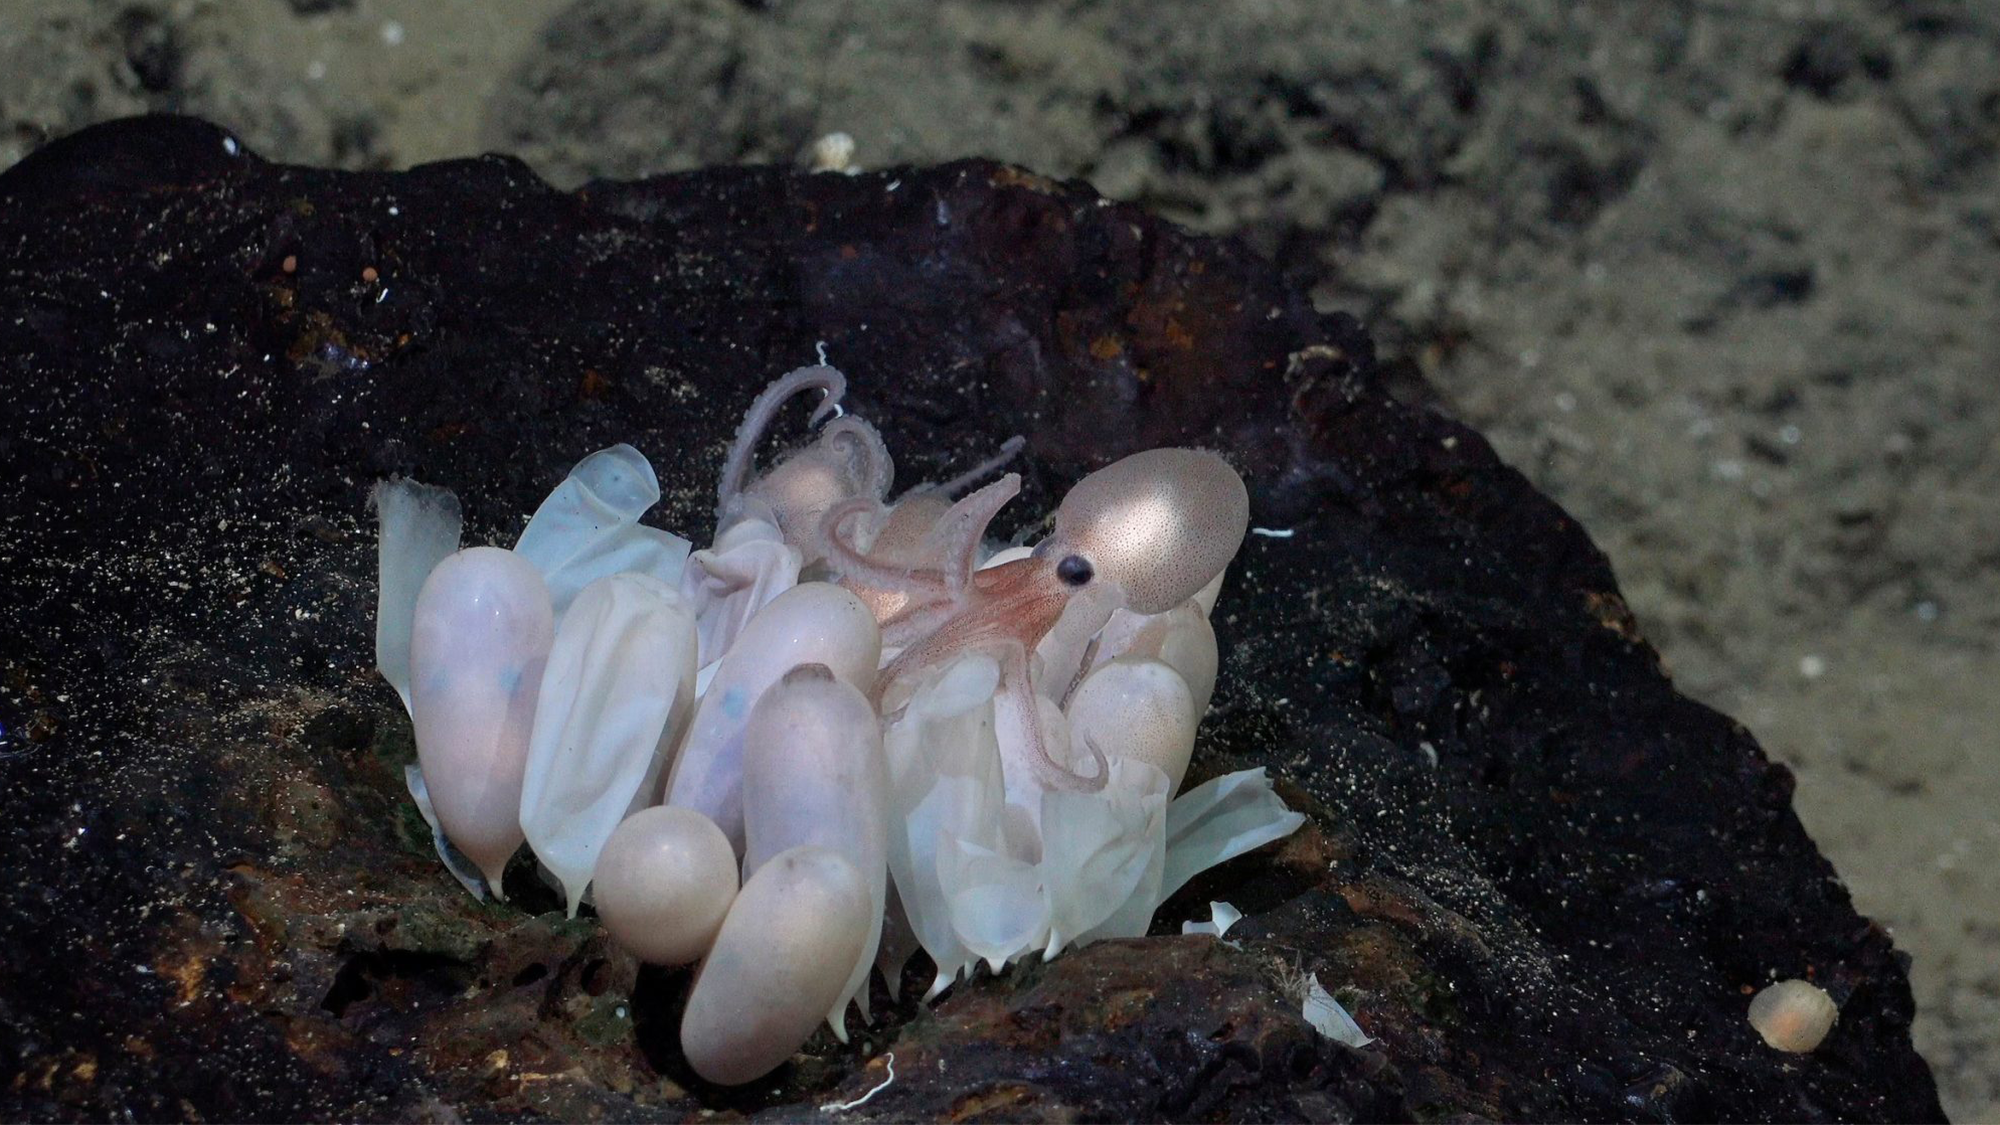 An octopus hatchling emerges from a group of eggs at a new octopus nursery. This nursery was first discovered in June 2023 at Tengosed Seamount off Costa Rica.